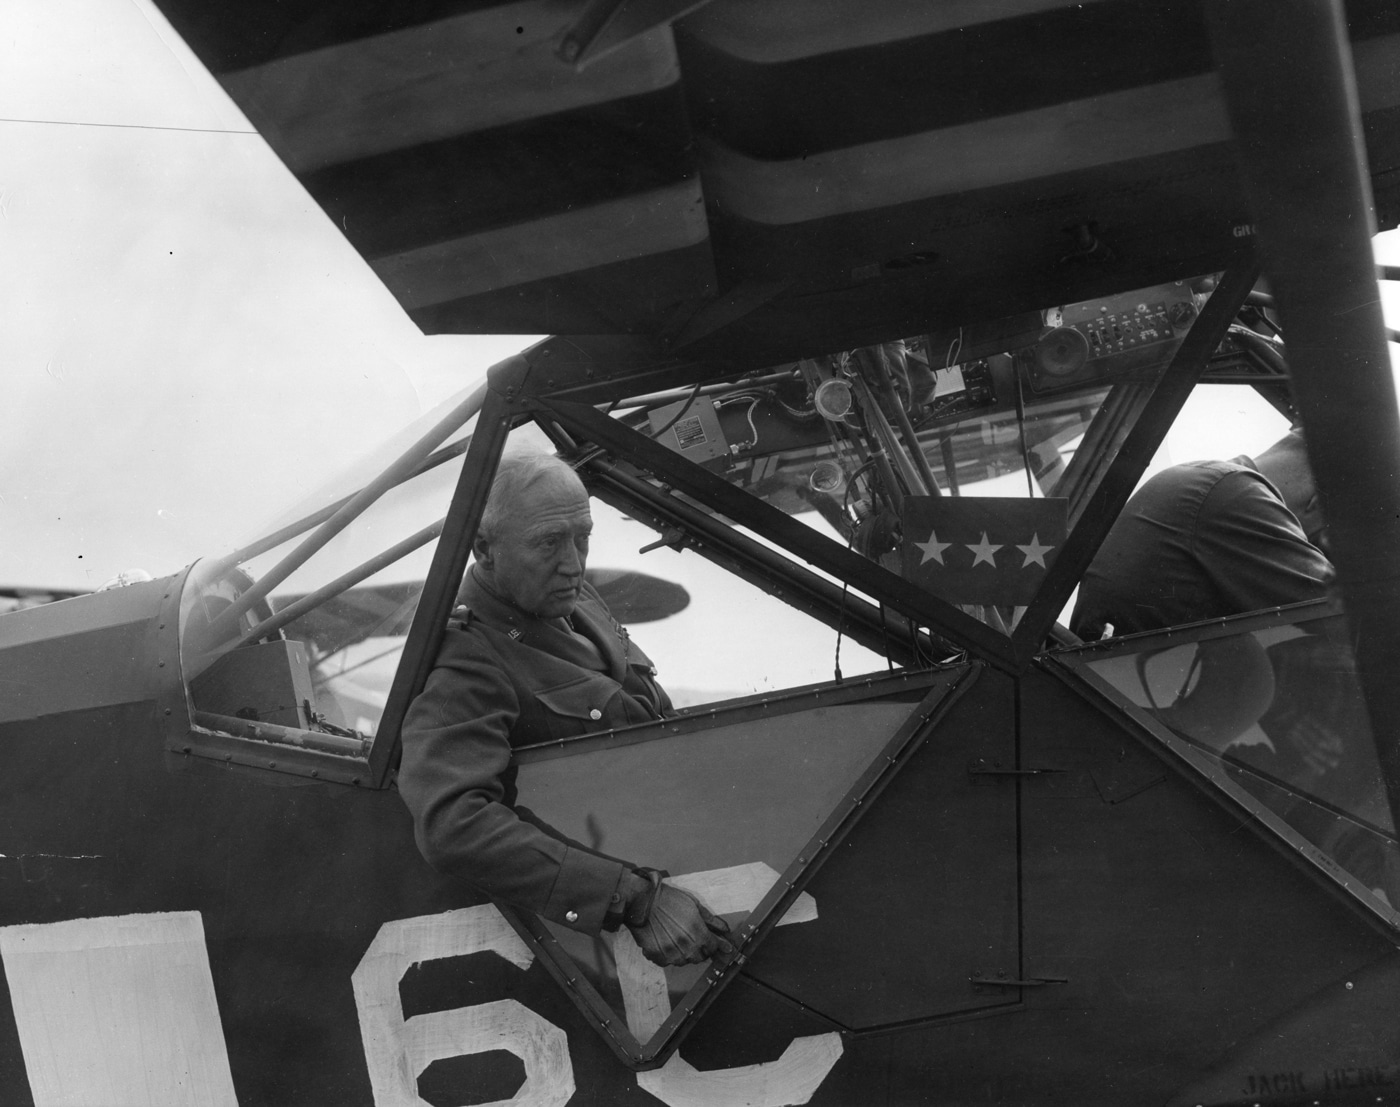 In this photograph, Lt Gen George Patton is seated in an observation plane. He is preparing to take to the air for a better view of the battlefield.